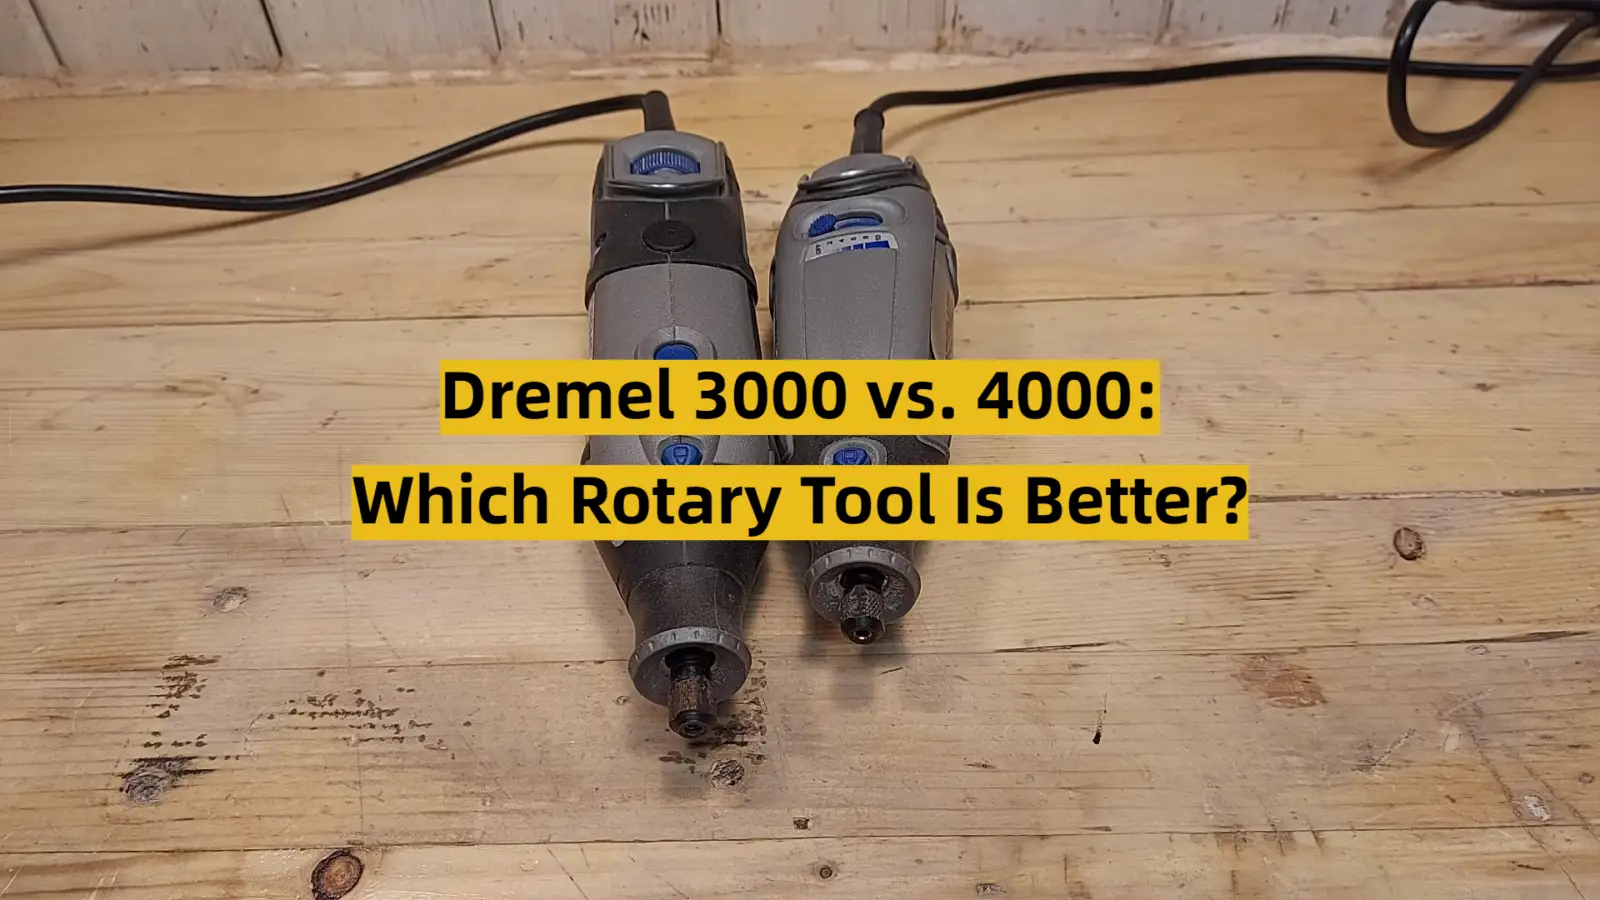 Dremel 3000 vs. 4000: Which Rotary Tool Is Better?